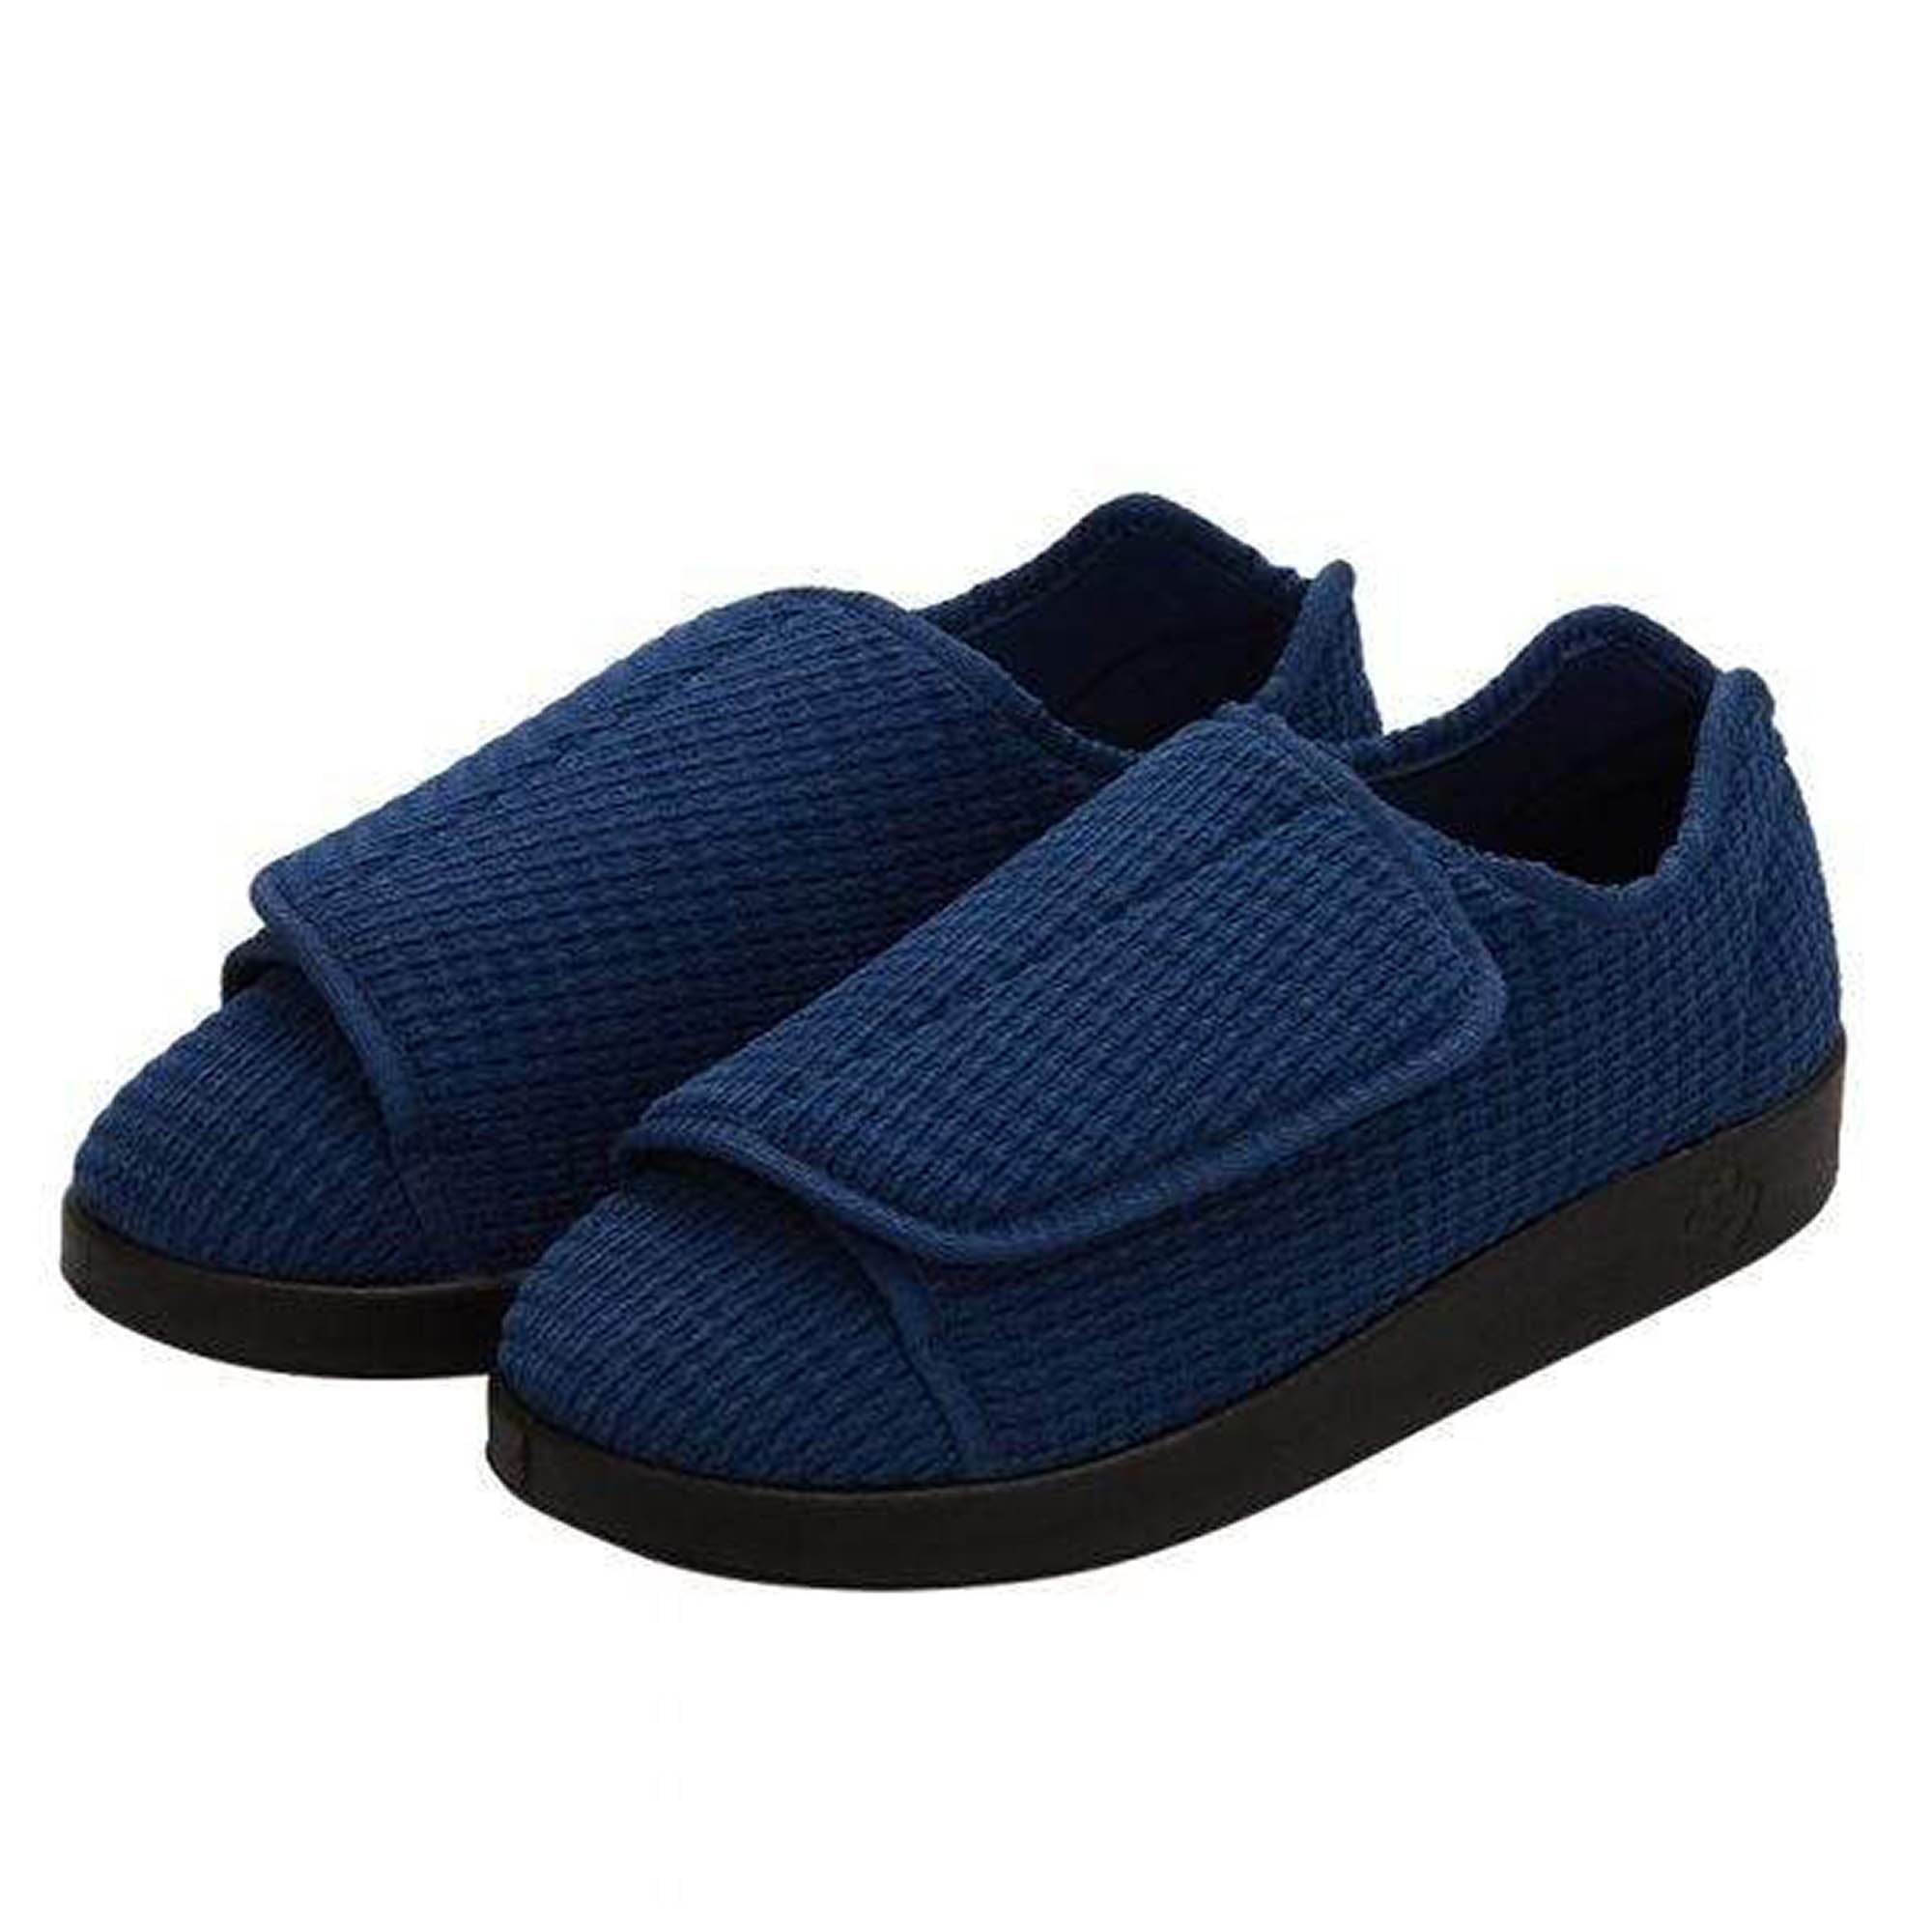 Silverts Men's Extra Extra Wide Slip-Resistant Slippers - Navy - 11